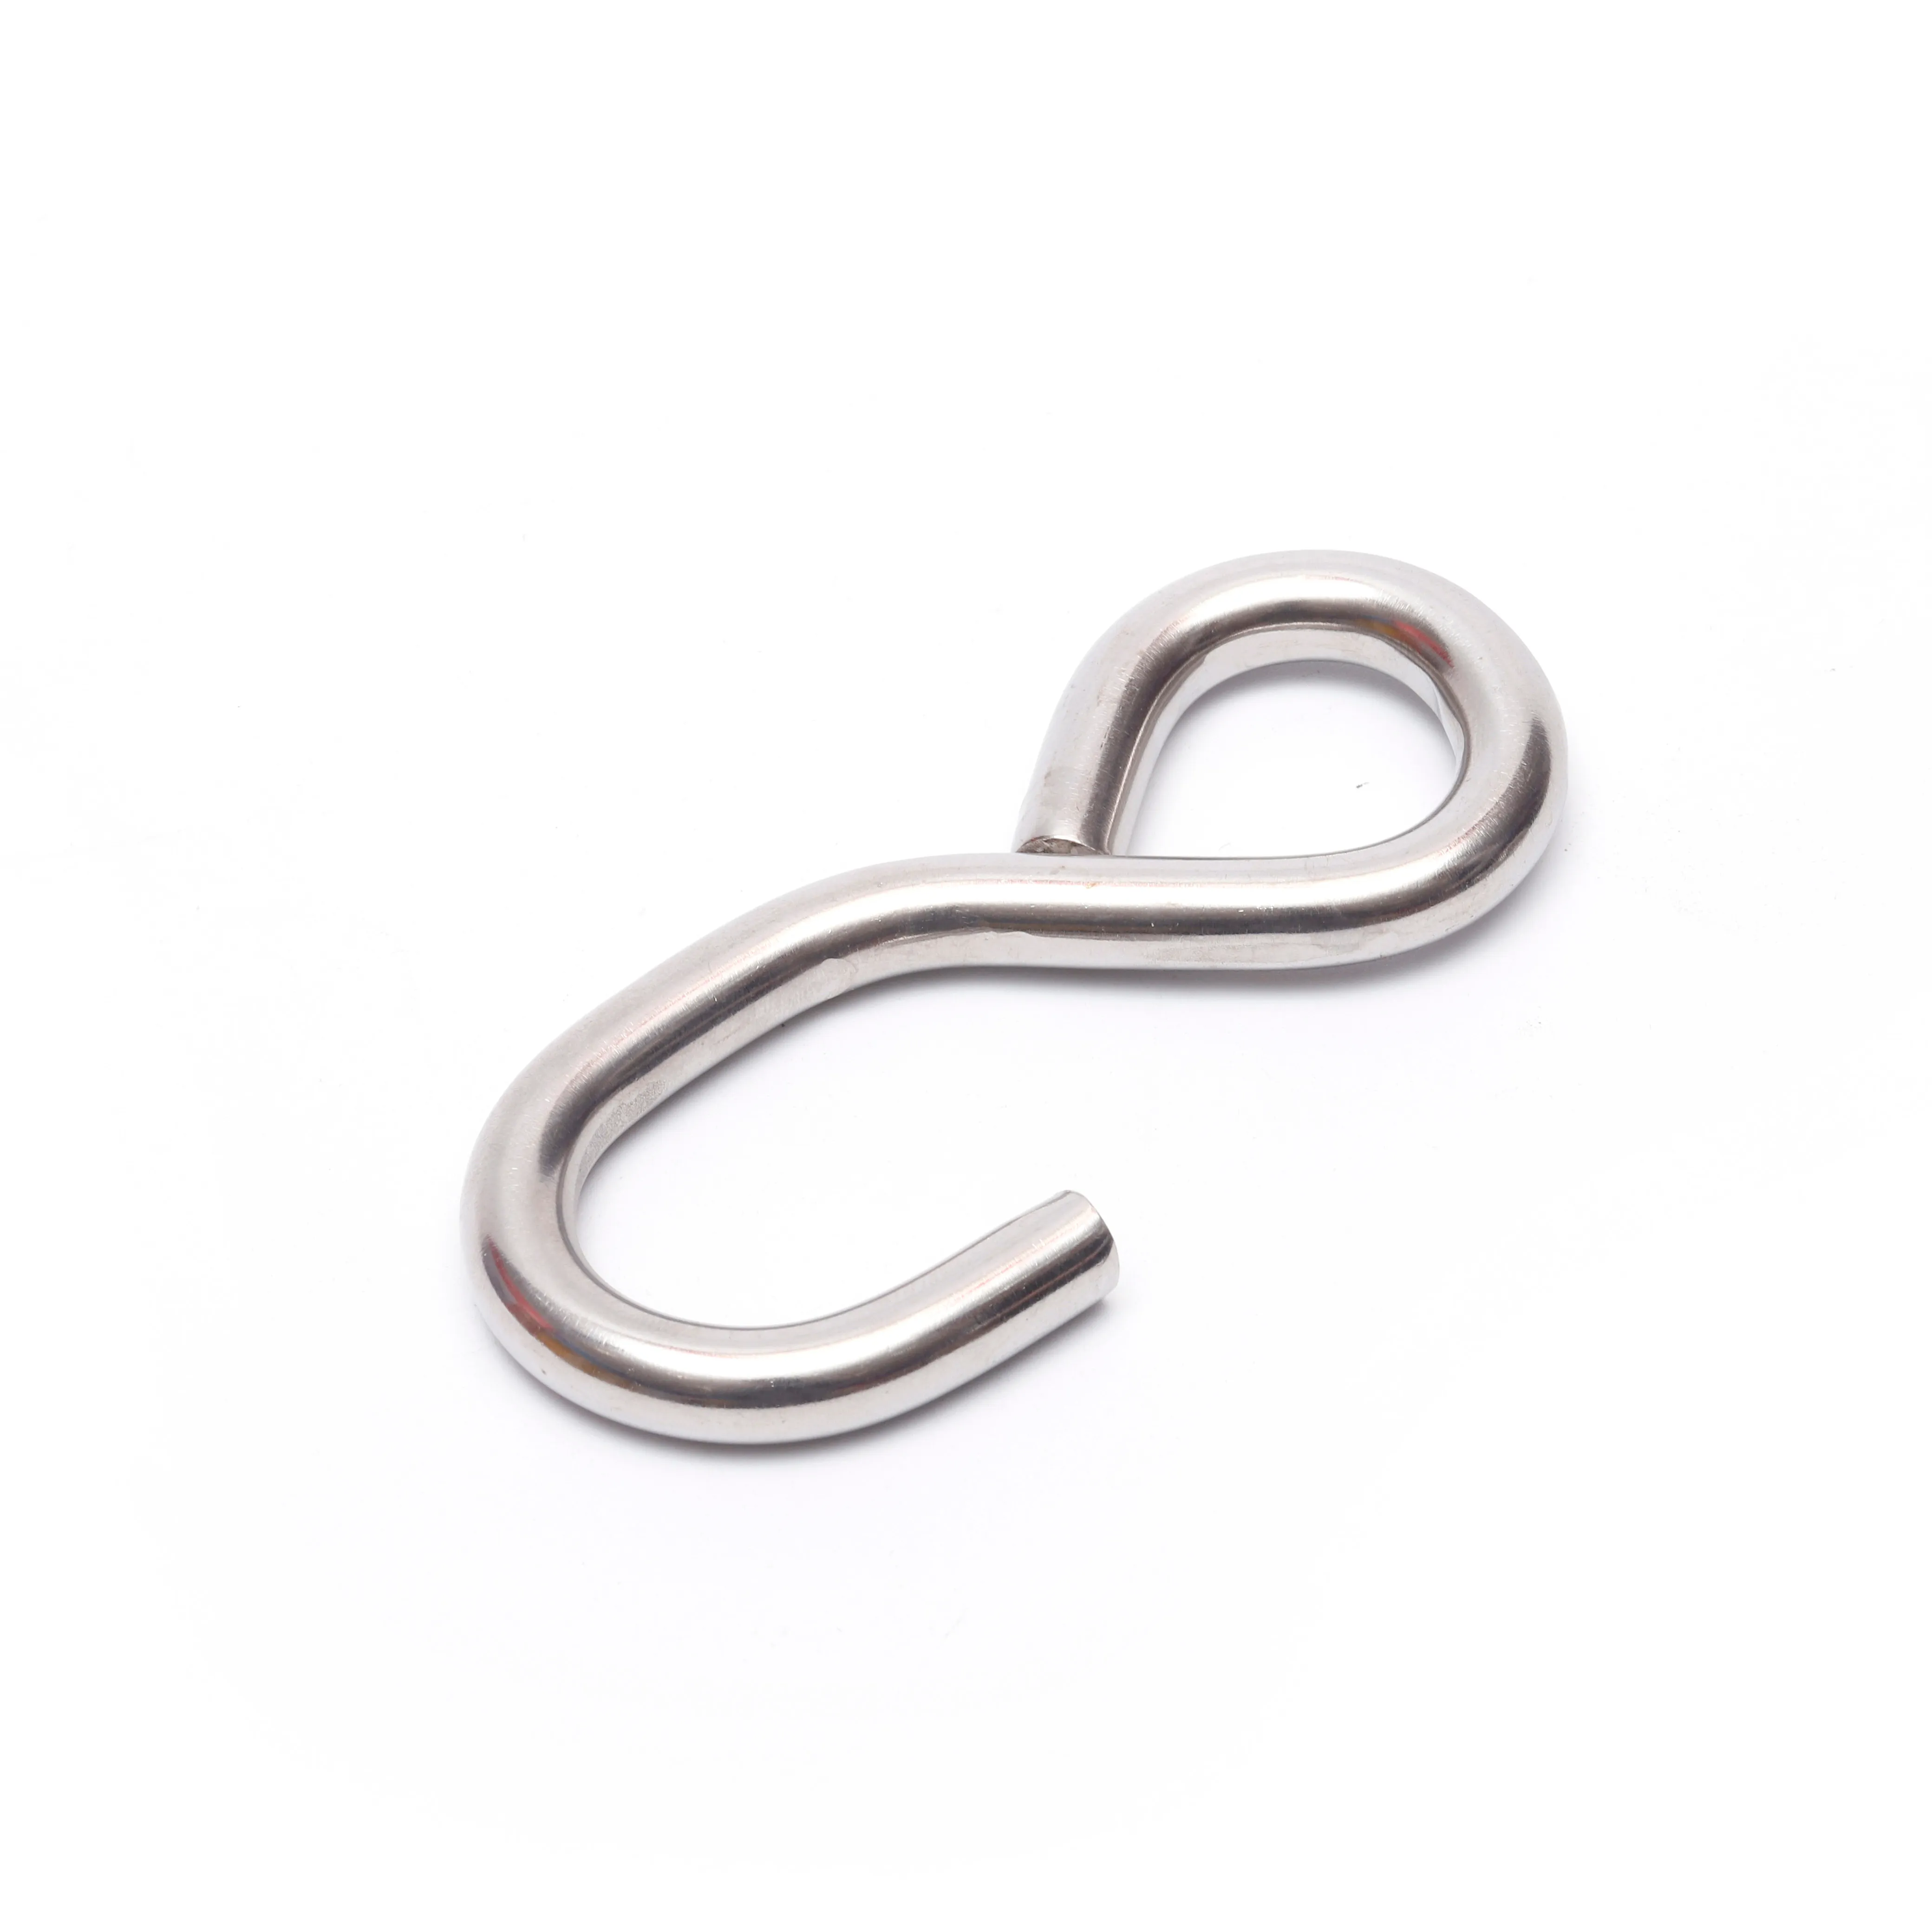 1 inch 0.8T 800kg metal stainless steel double s hook for ratchet tie down strap